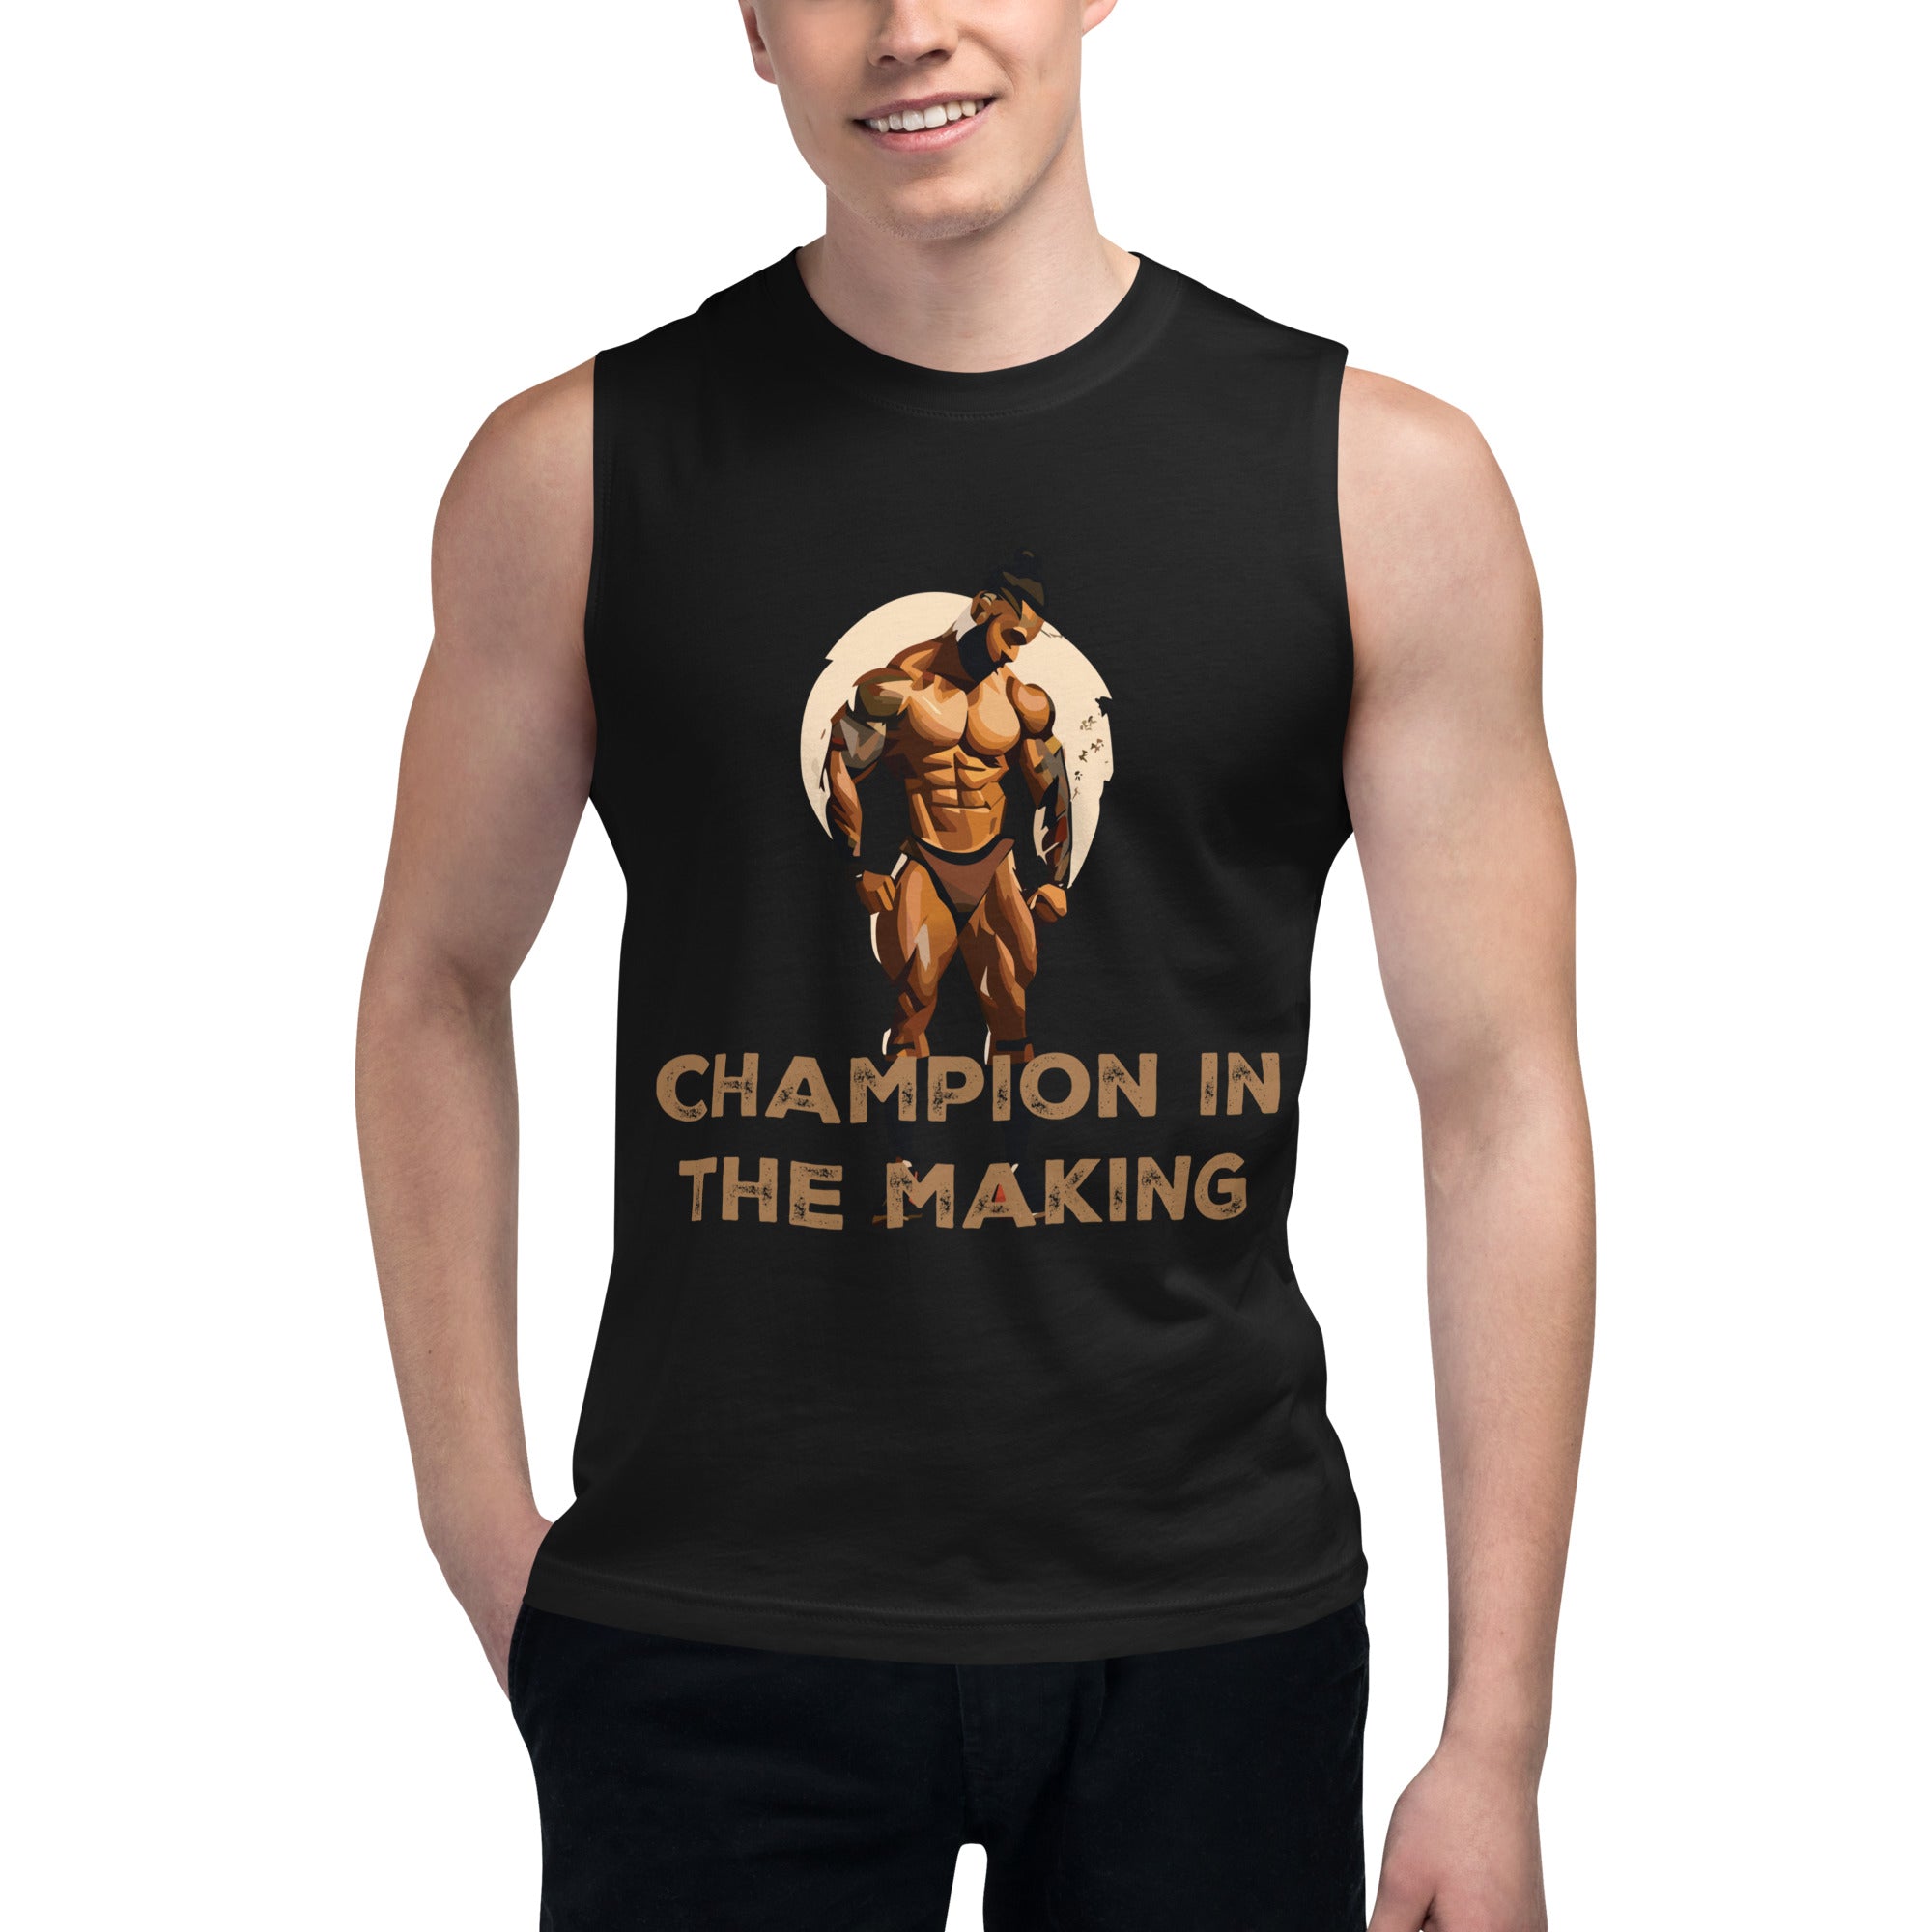 Champion in the Making Muscle Shirt